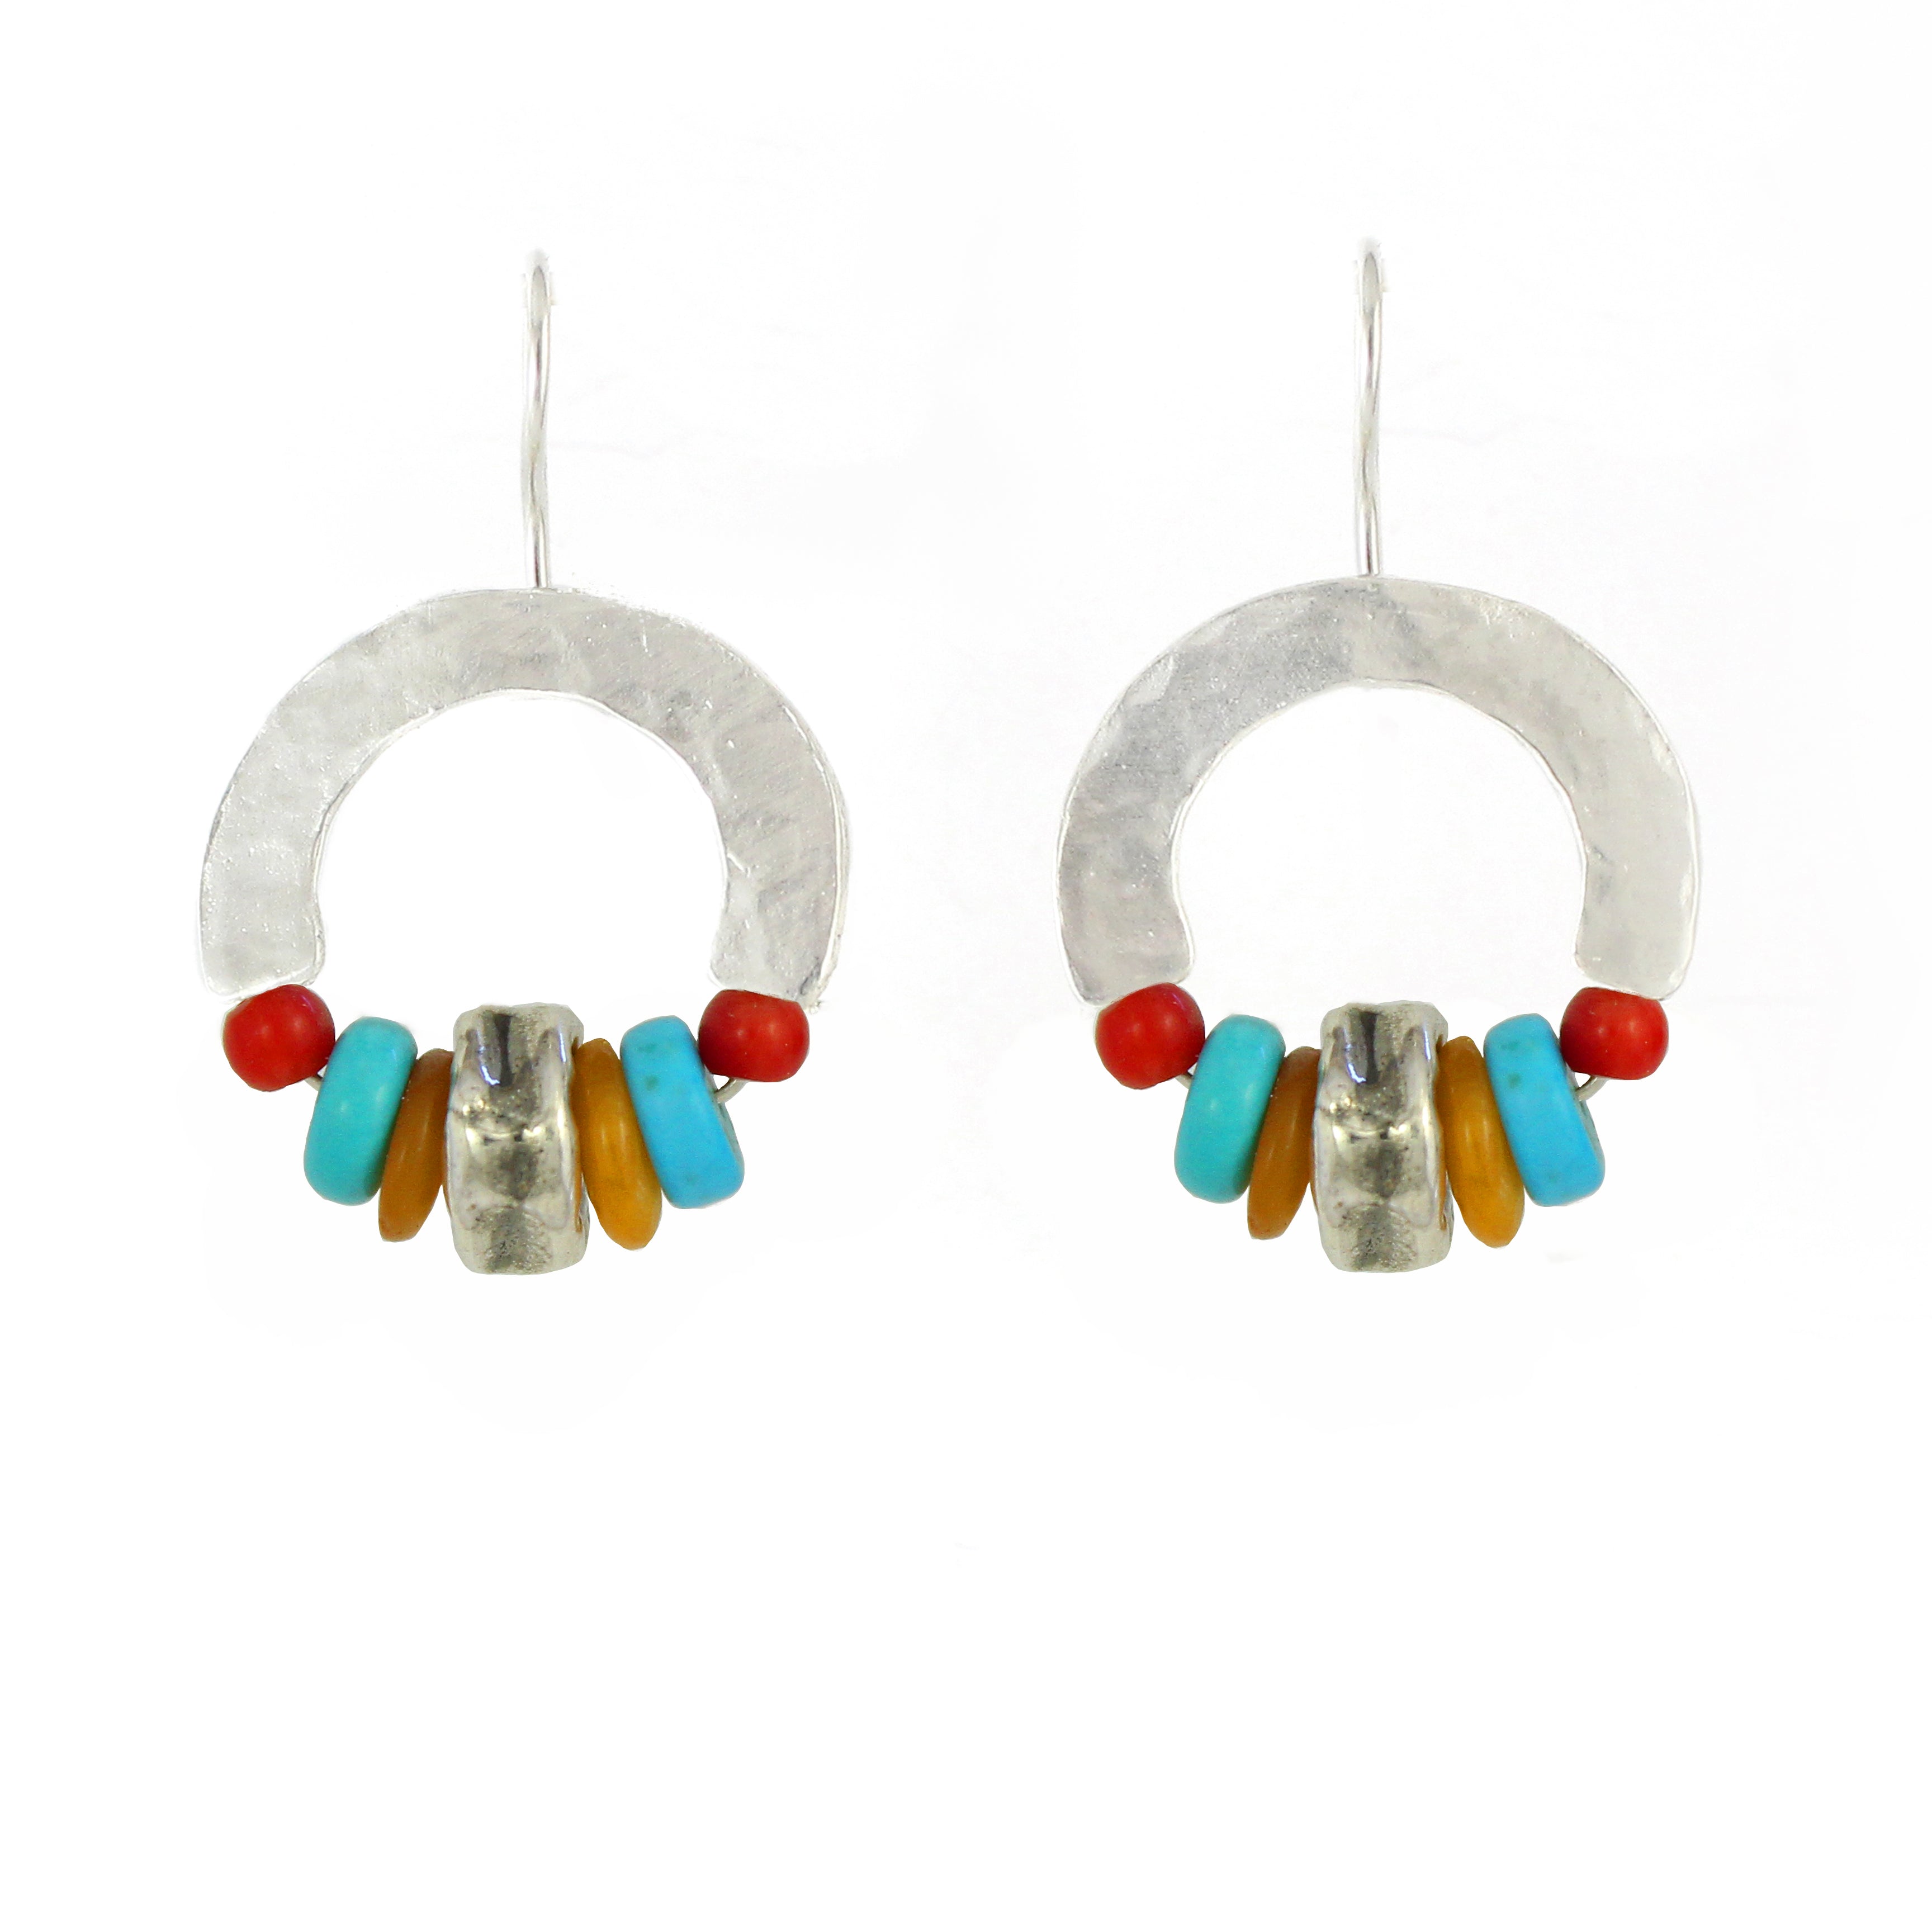 Crescent Moon - Sterling Silver, Red Coral, Calcite, & Turquoise Gemstones Earrings